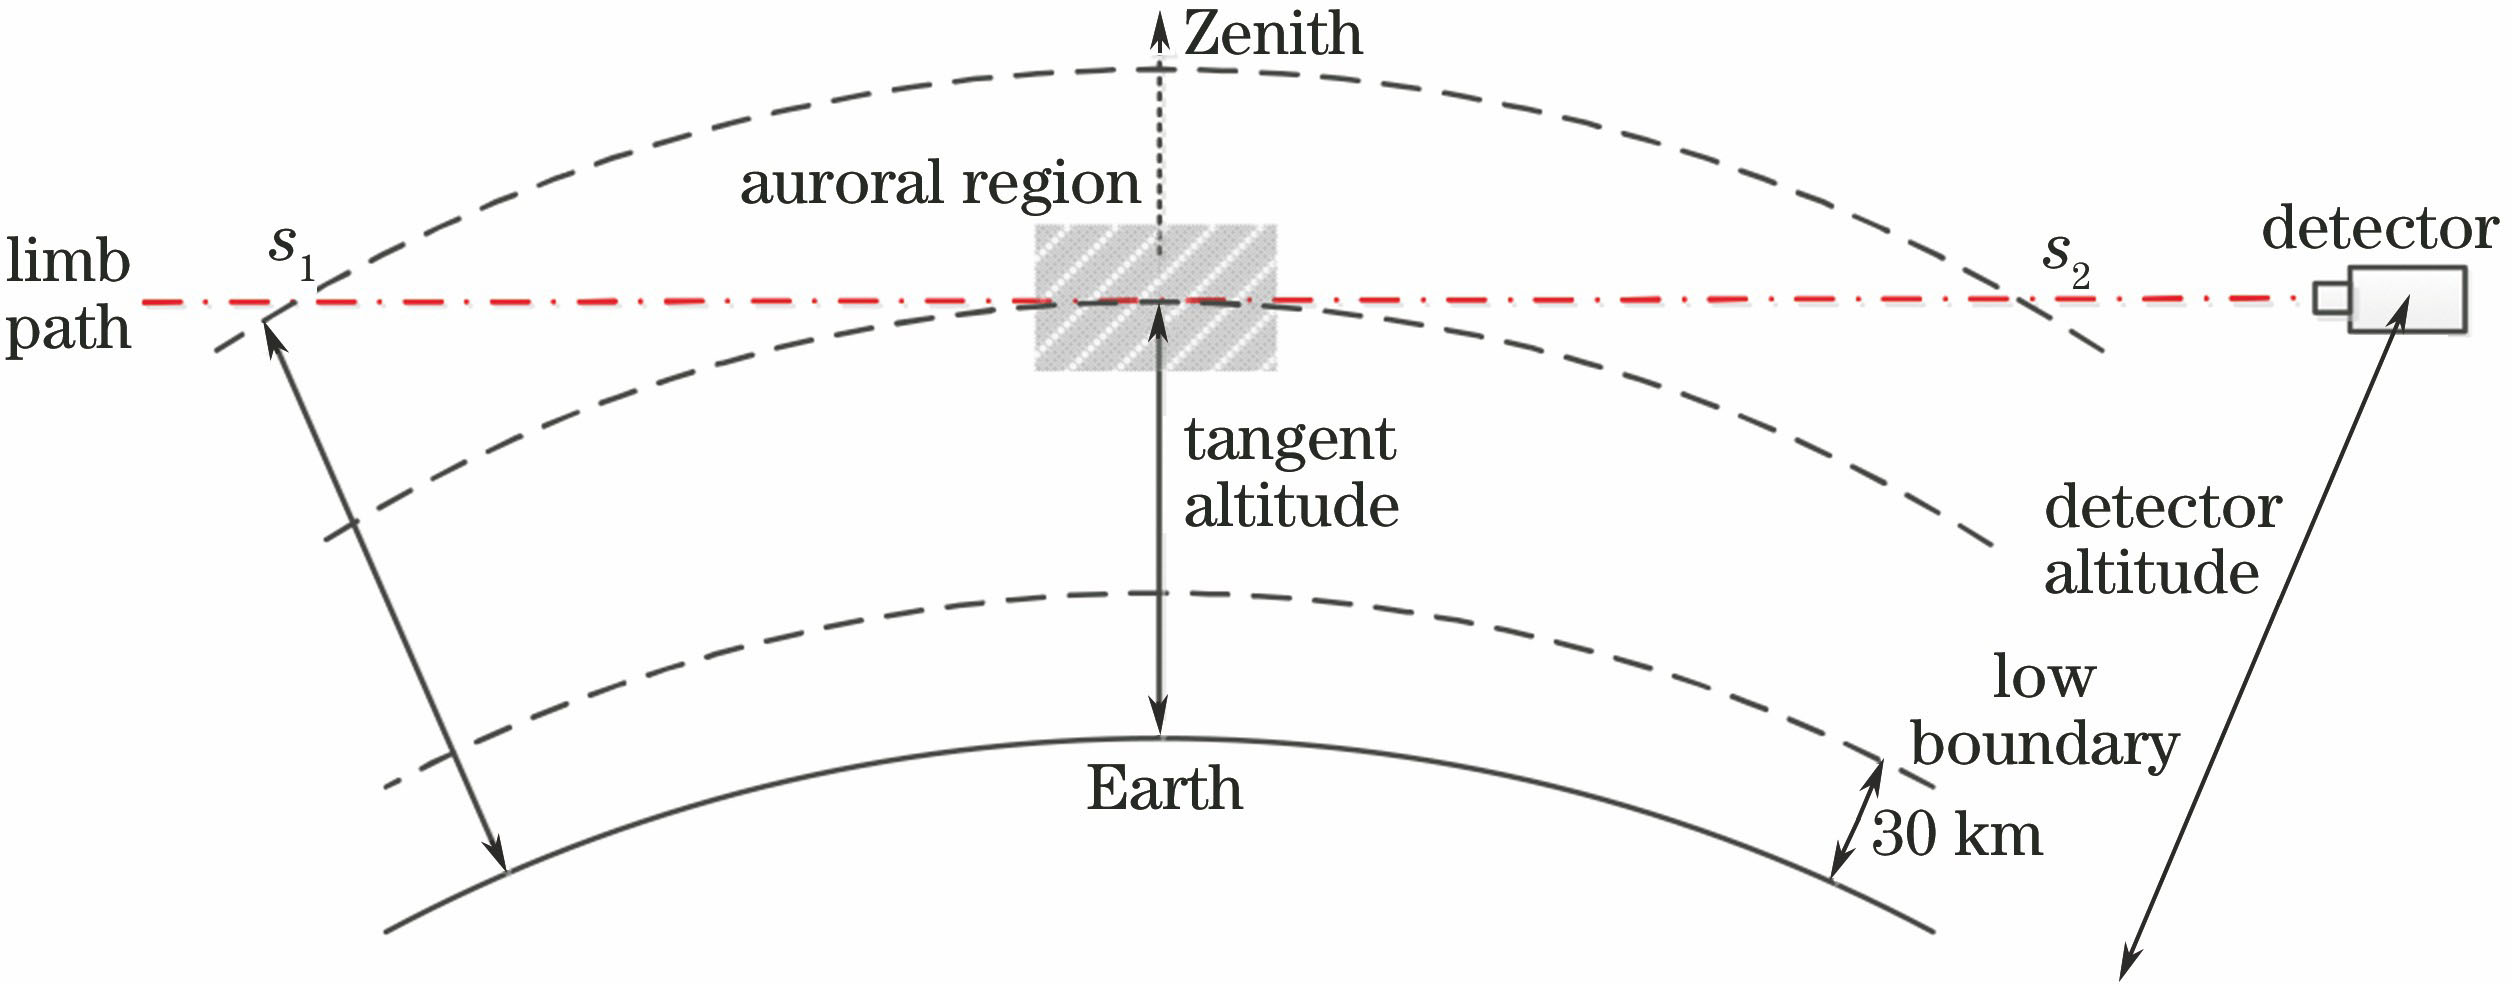 Schematic of infrared limb radiance measurement of middle and upper atmosphere